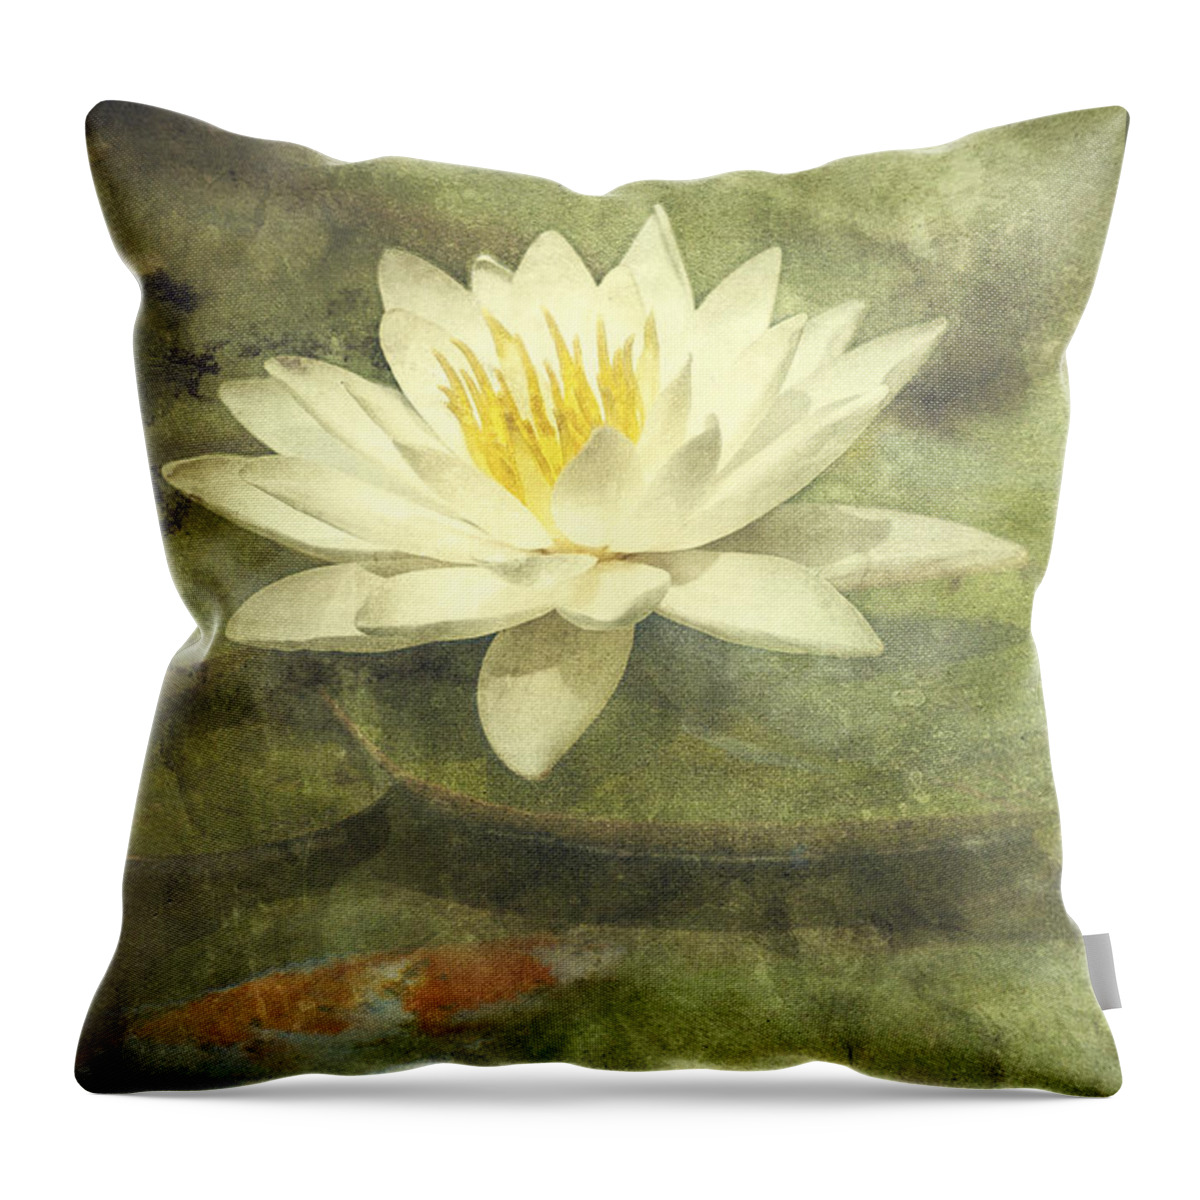 Water Lily Throw Pillow featuring the photograph Water Lily by Scott Norris